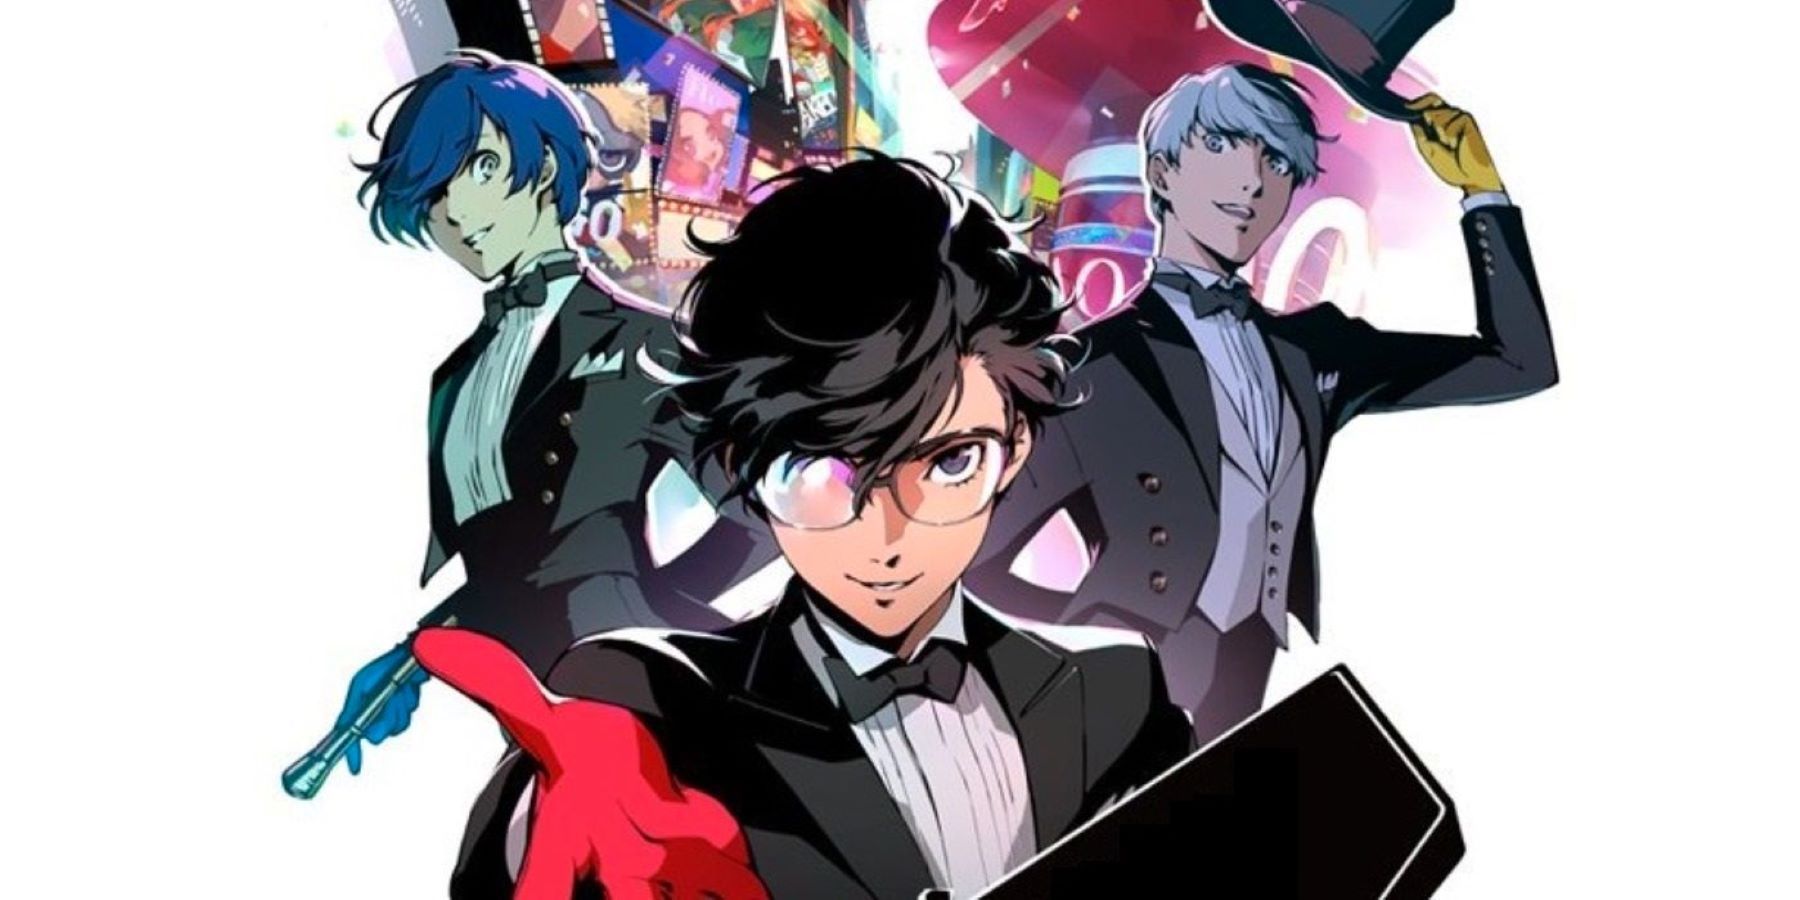 The protagonists of Persona 3, Persona 4 and Persona 5 in tuxedos